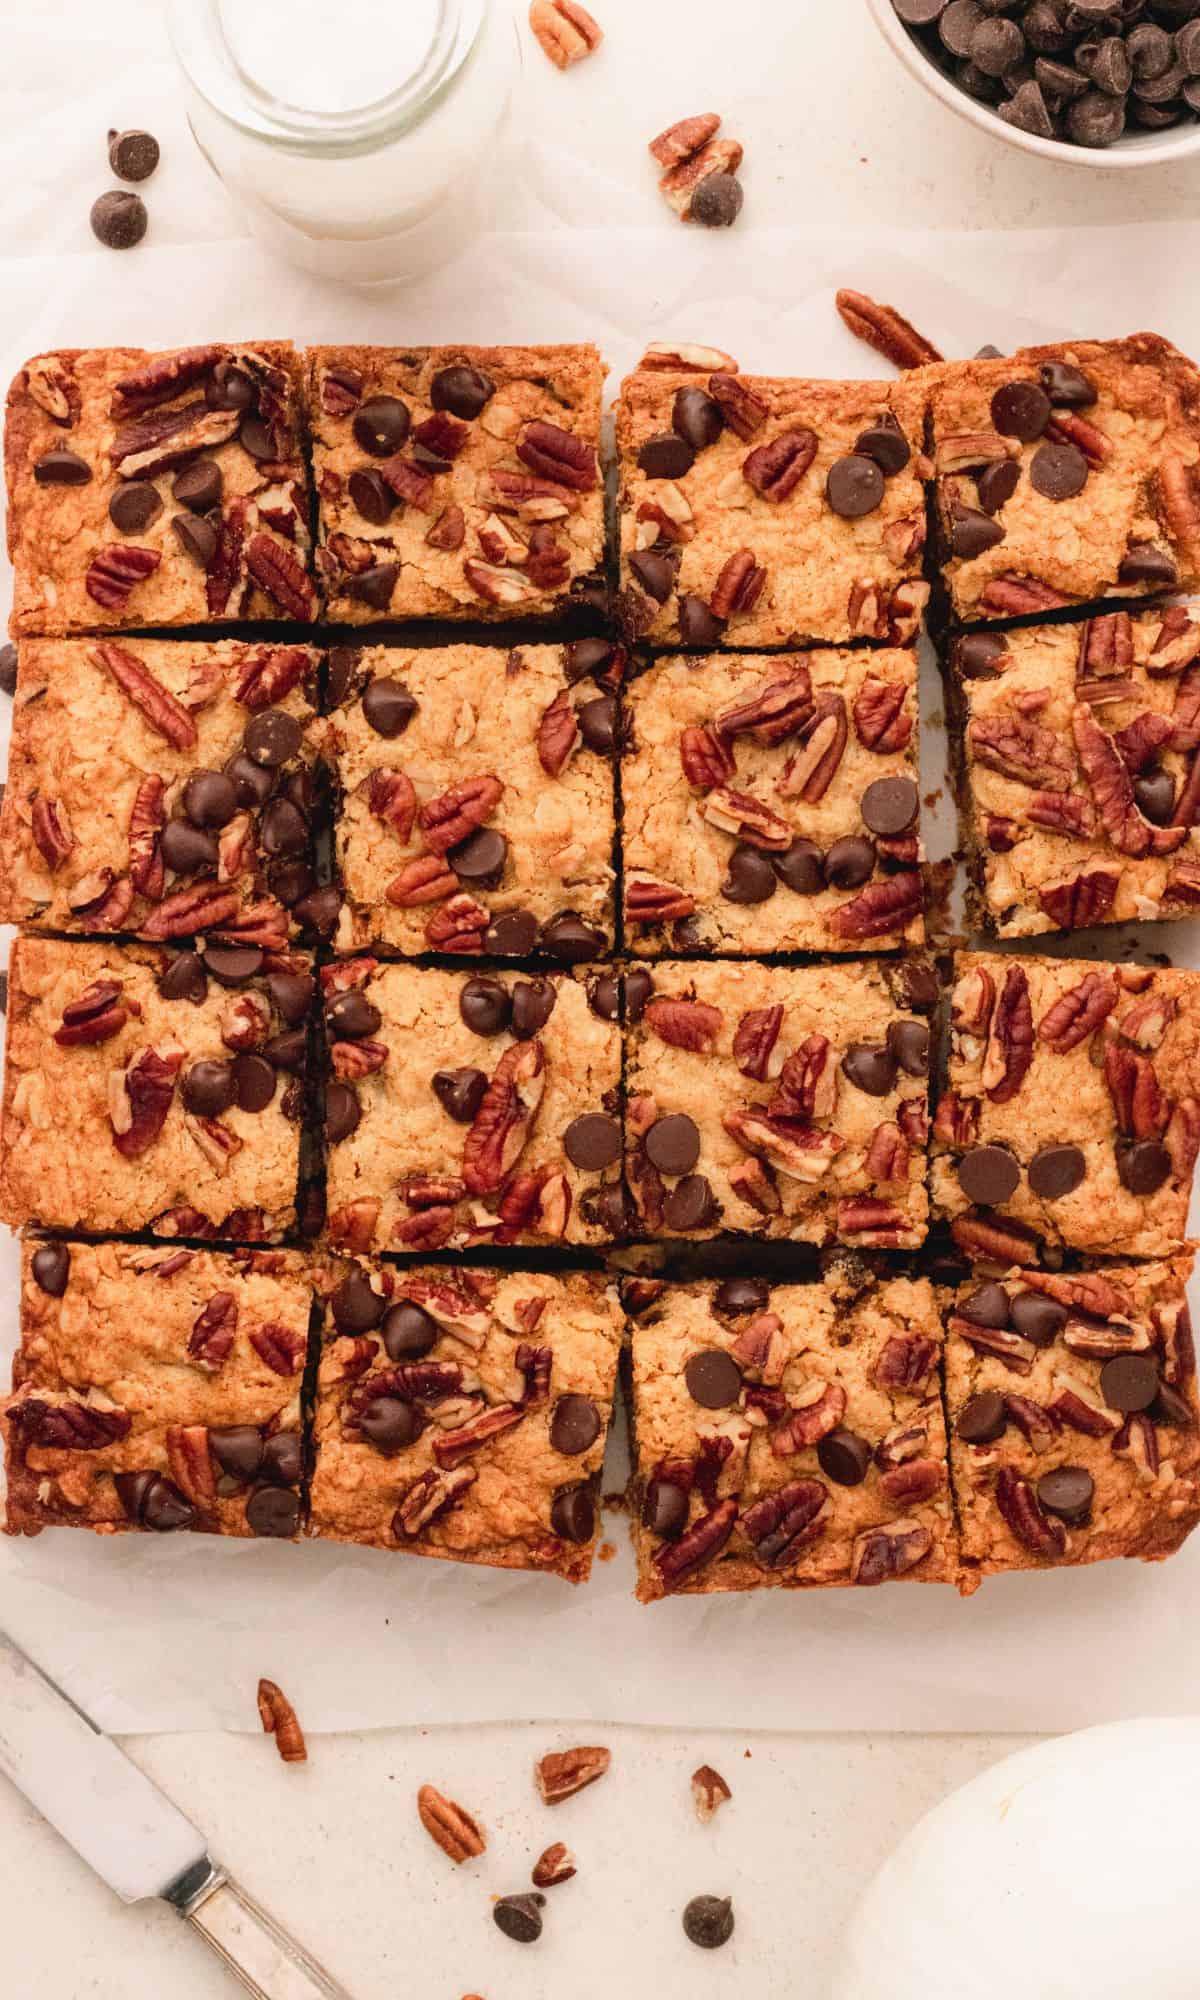 Baked pumpkin oatmeal bars sliced into squares.